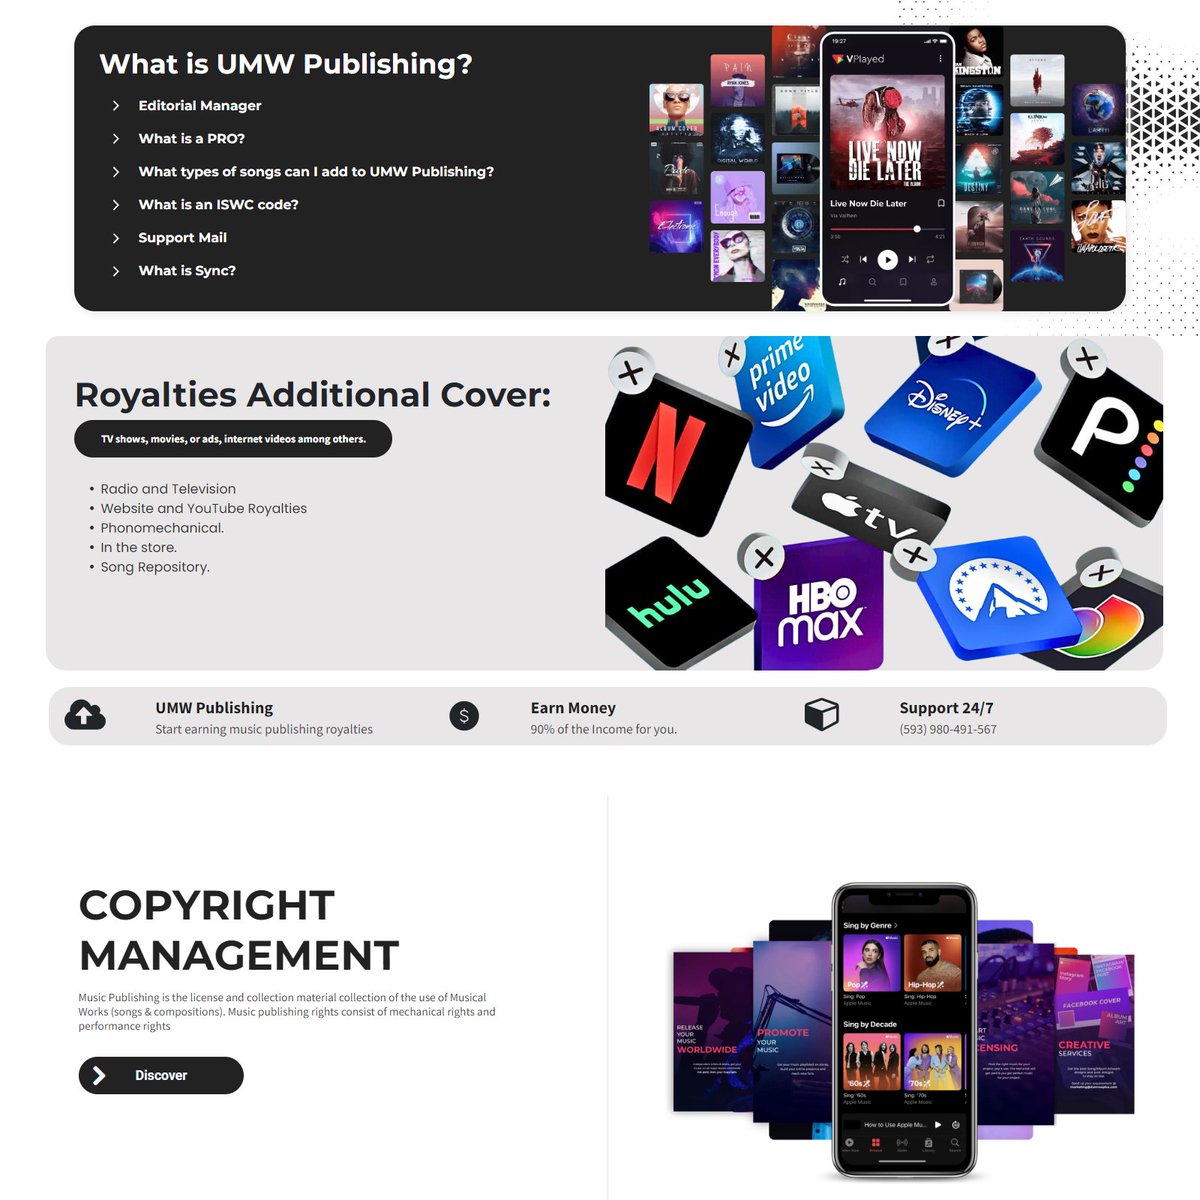 #MusicPublishing
#MusicRights
#Copyright
#MusicRoyalties
#Songwriting
#SyncLicensing
#MusicBusiness
#MusicDistribution
#MusicLicencing
#MusicCatalogue
#MusicClearance
#MusicIntellectualProperty
#MusicContracts
#MusicManagement
#MusicComposers
#MusicPublishers